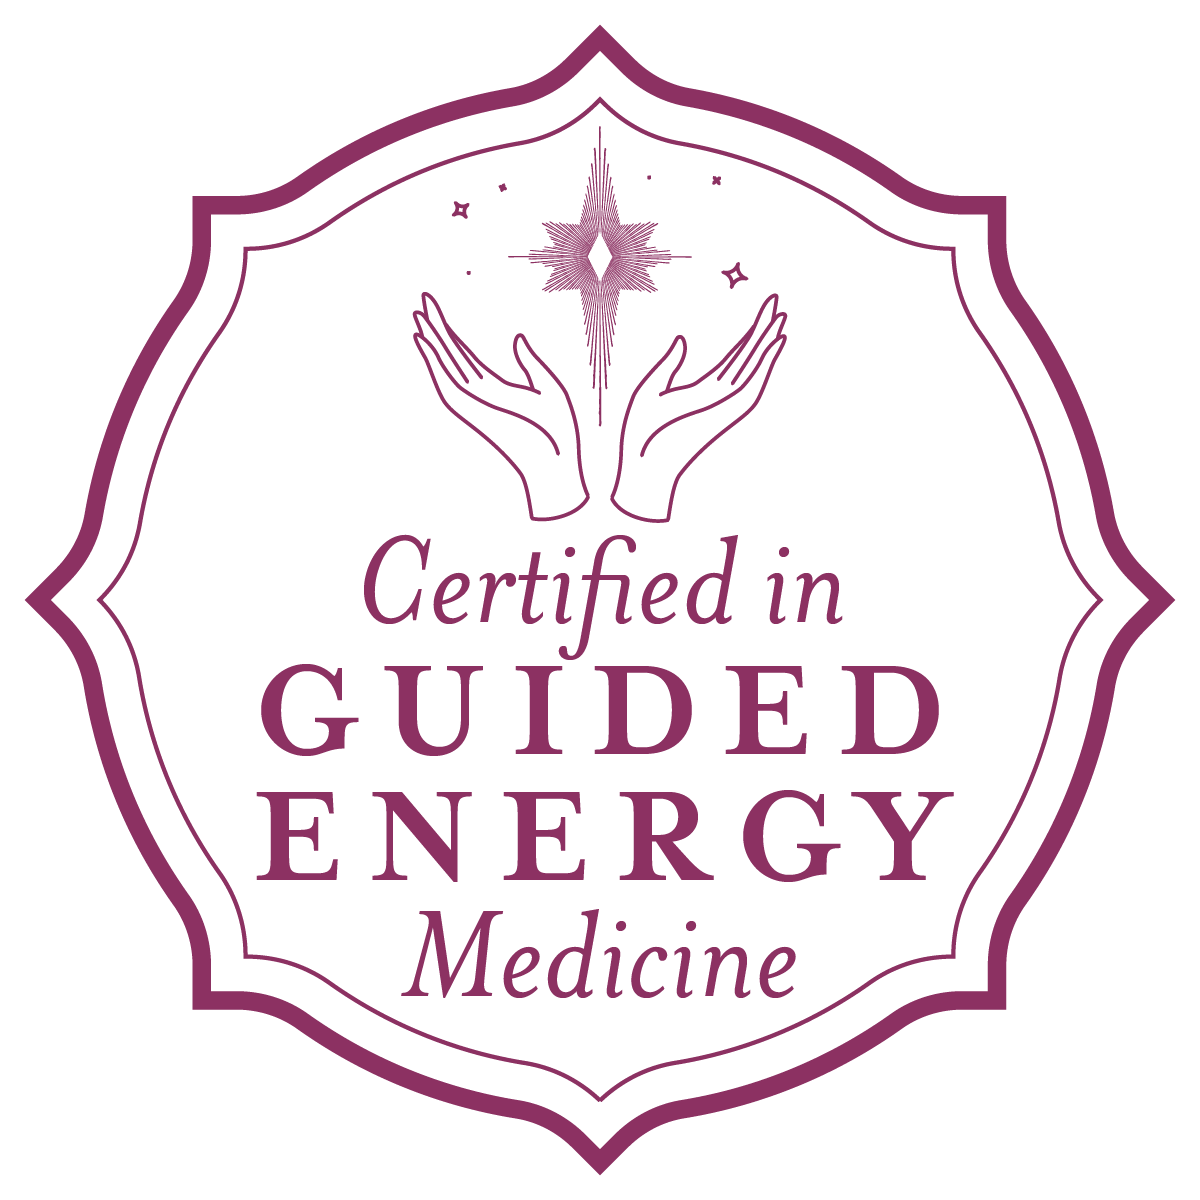 Certified in Guided Energy Medicine